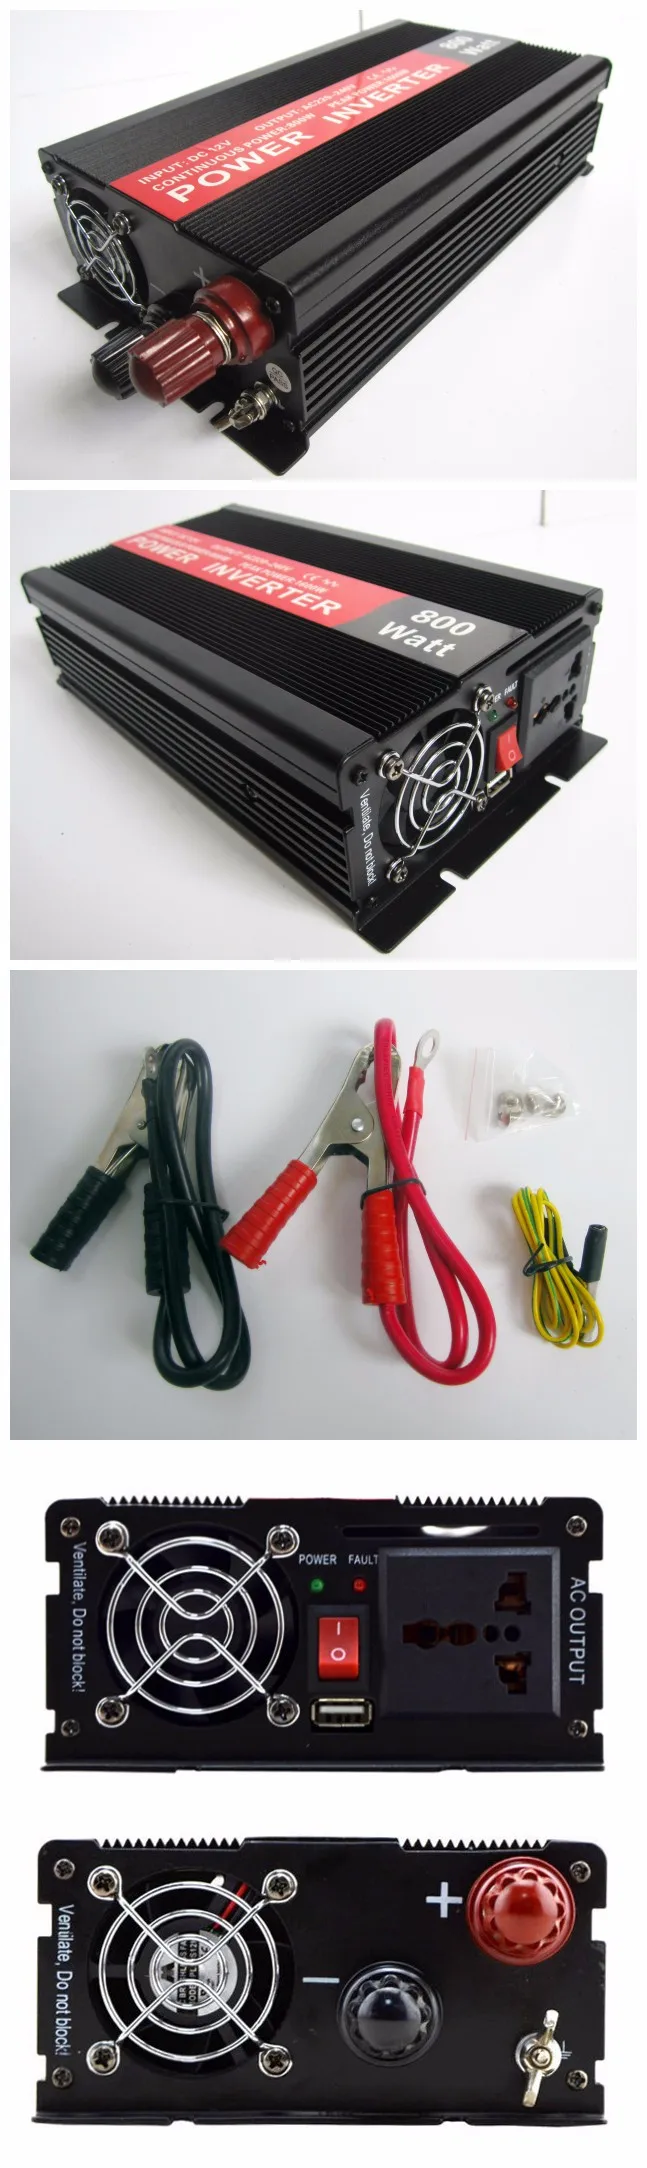 800w And 1000w Solar Power Inverter With Usb For Home Appliance Using